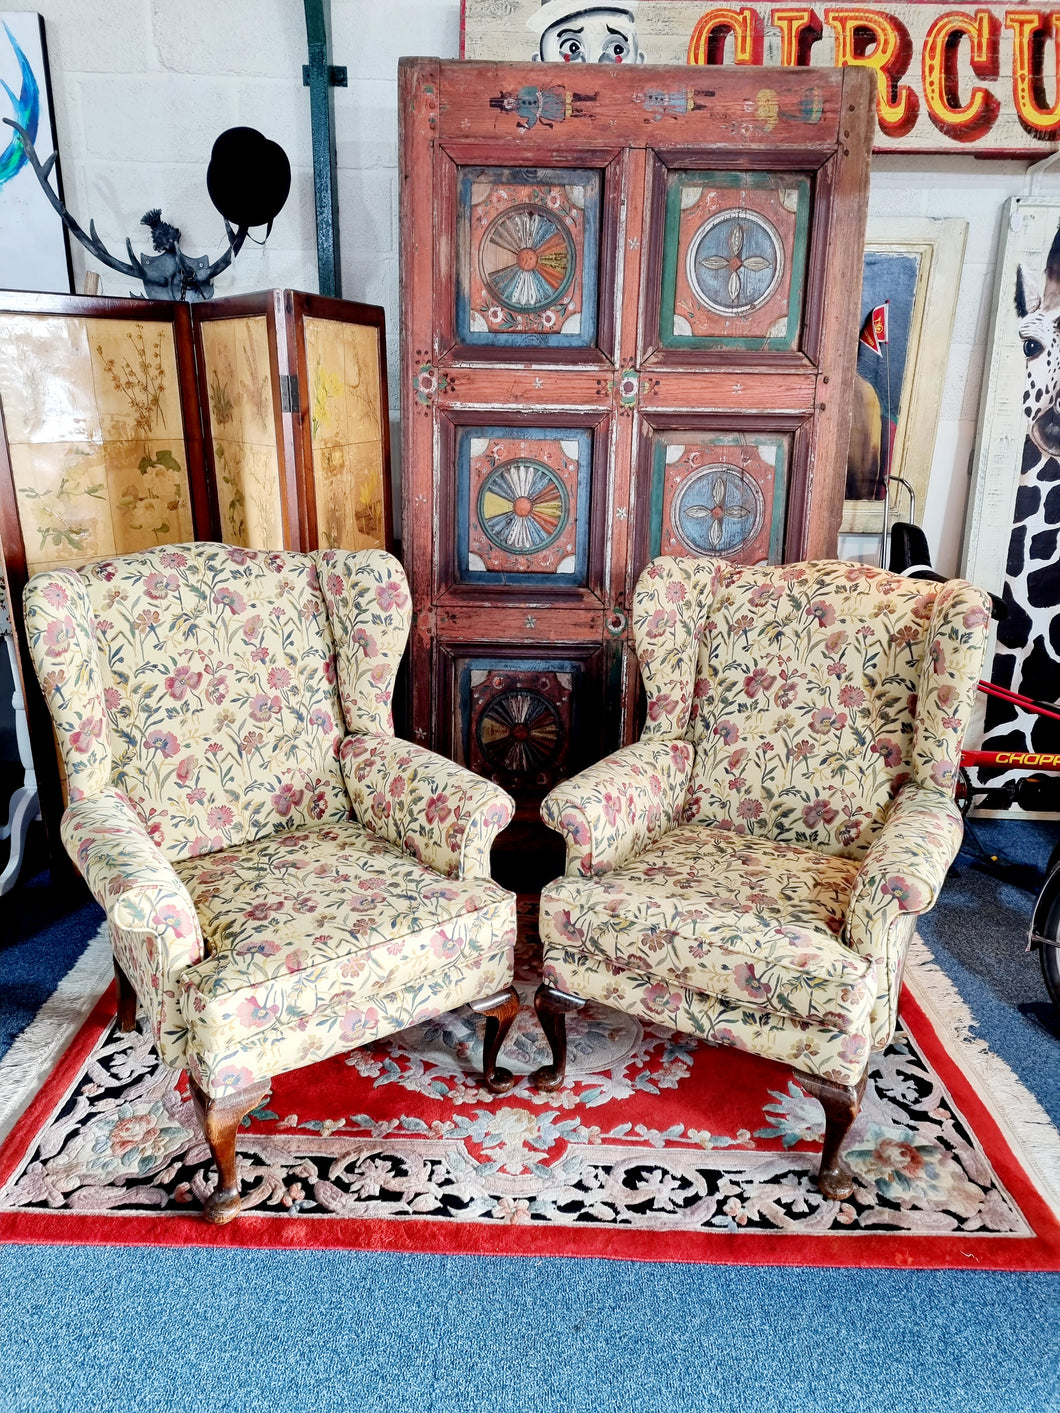 Pair of Wingback Armchairs